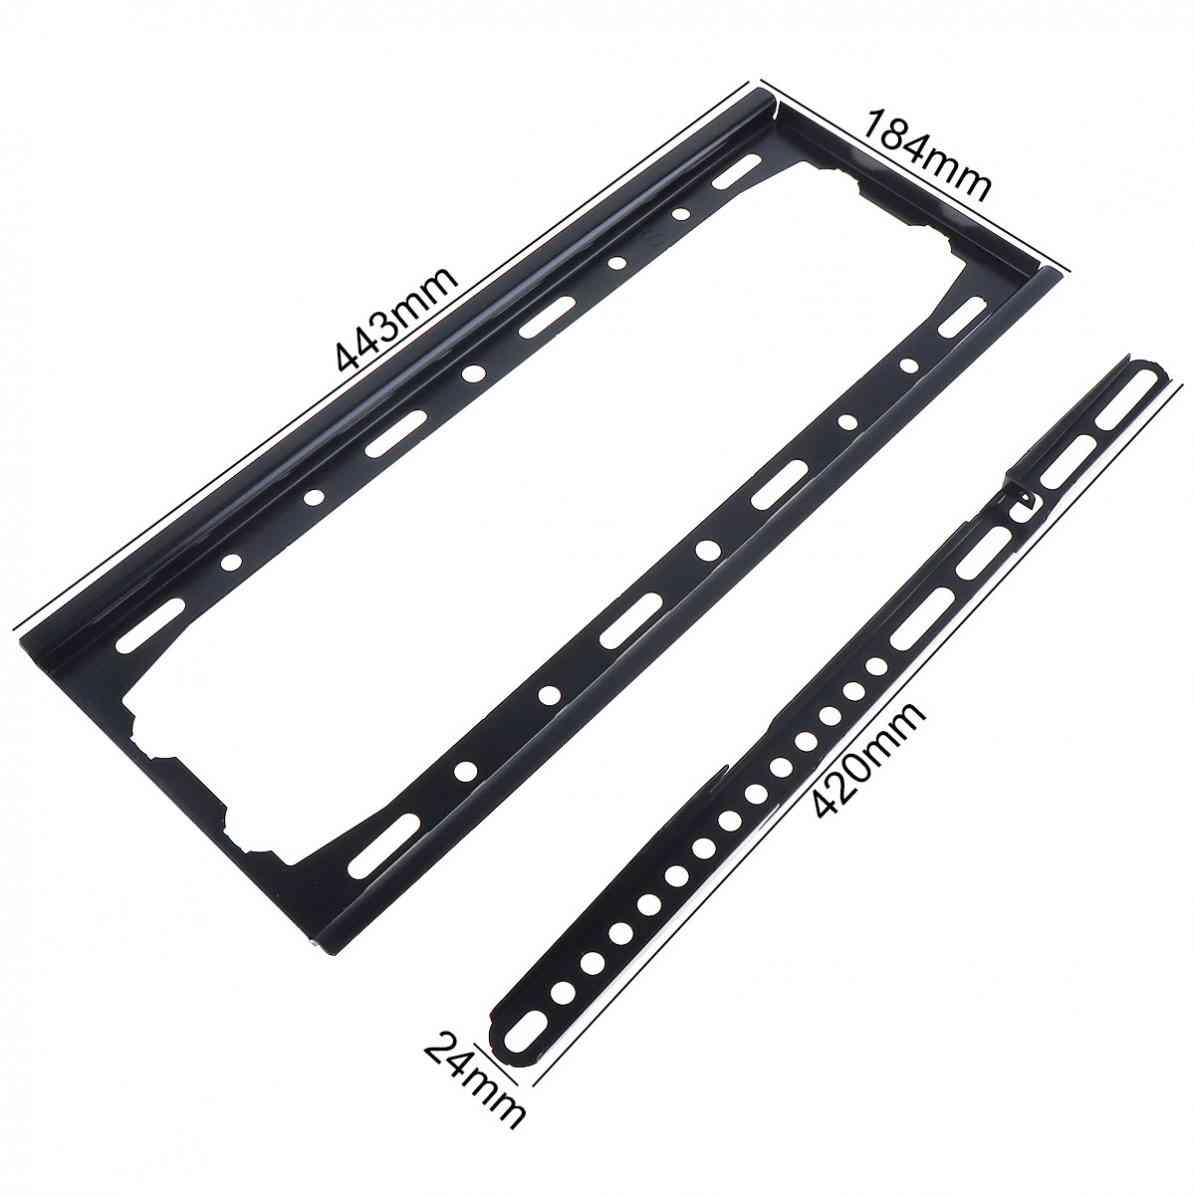 Universal Wall Mount Tv Bracket, Fixed Flat Panel For 26-55 Inch Lcd/led Monitor